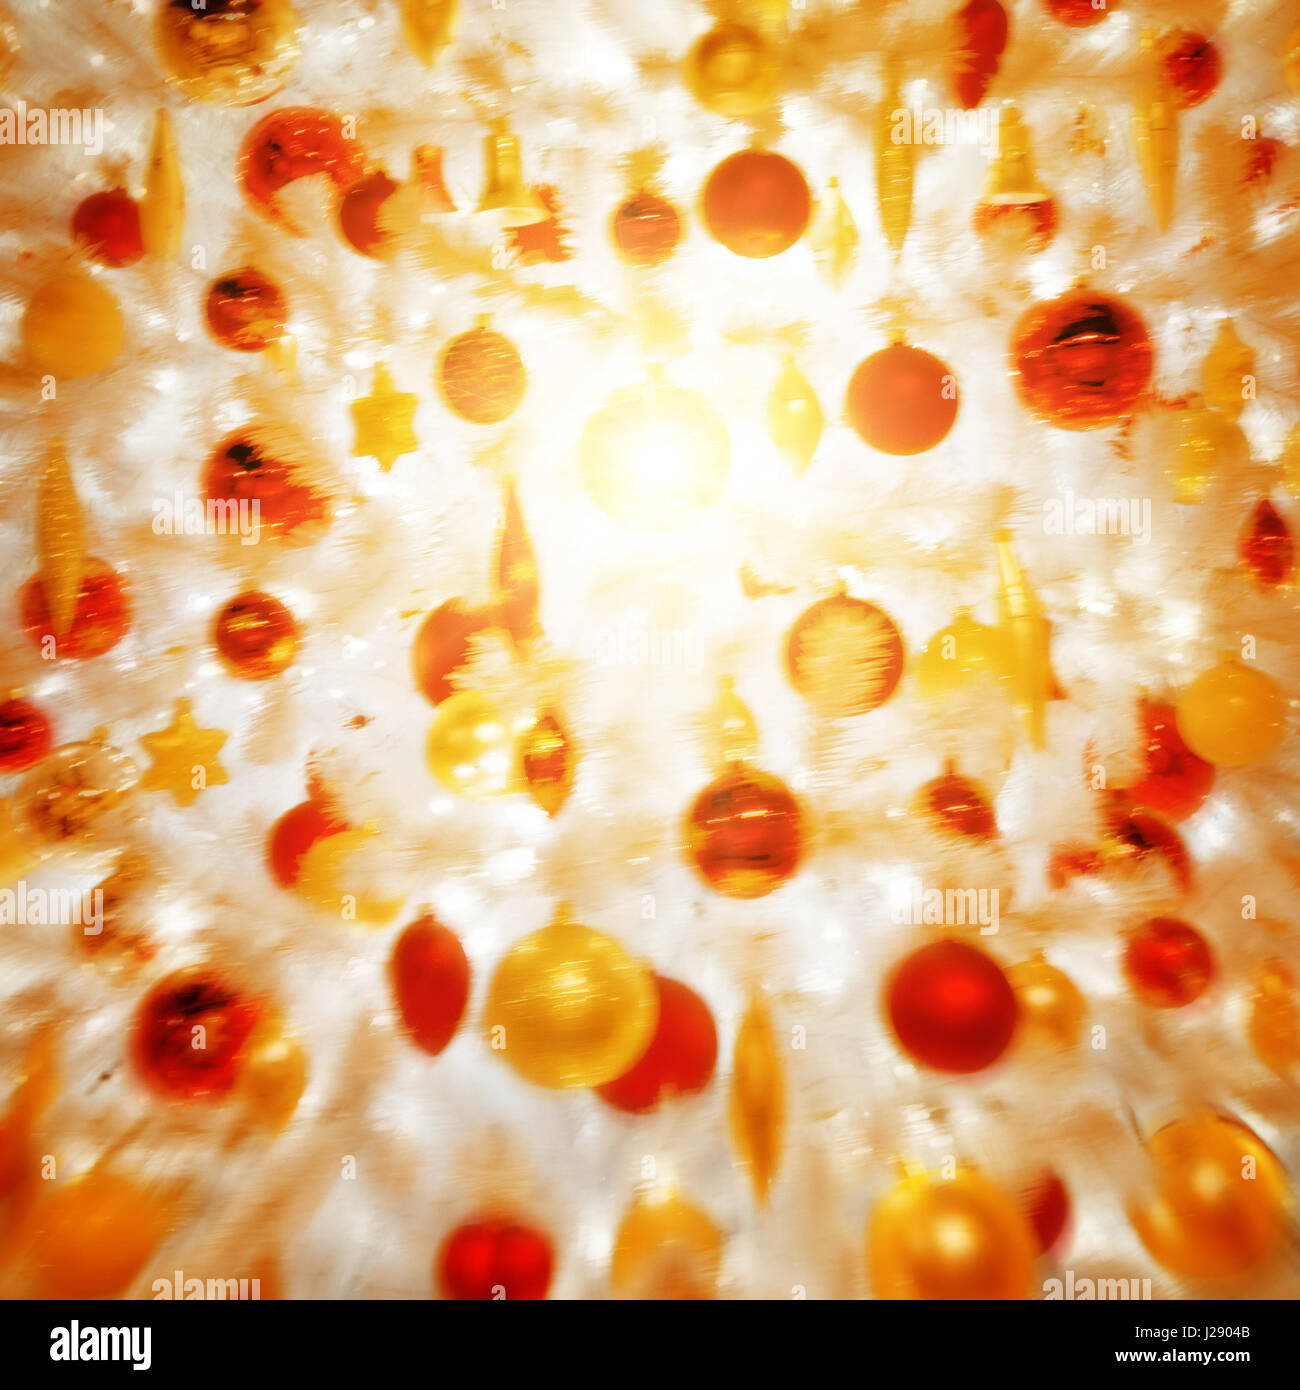 blurred abstract background of Christmas decorations Stock Photo